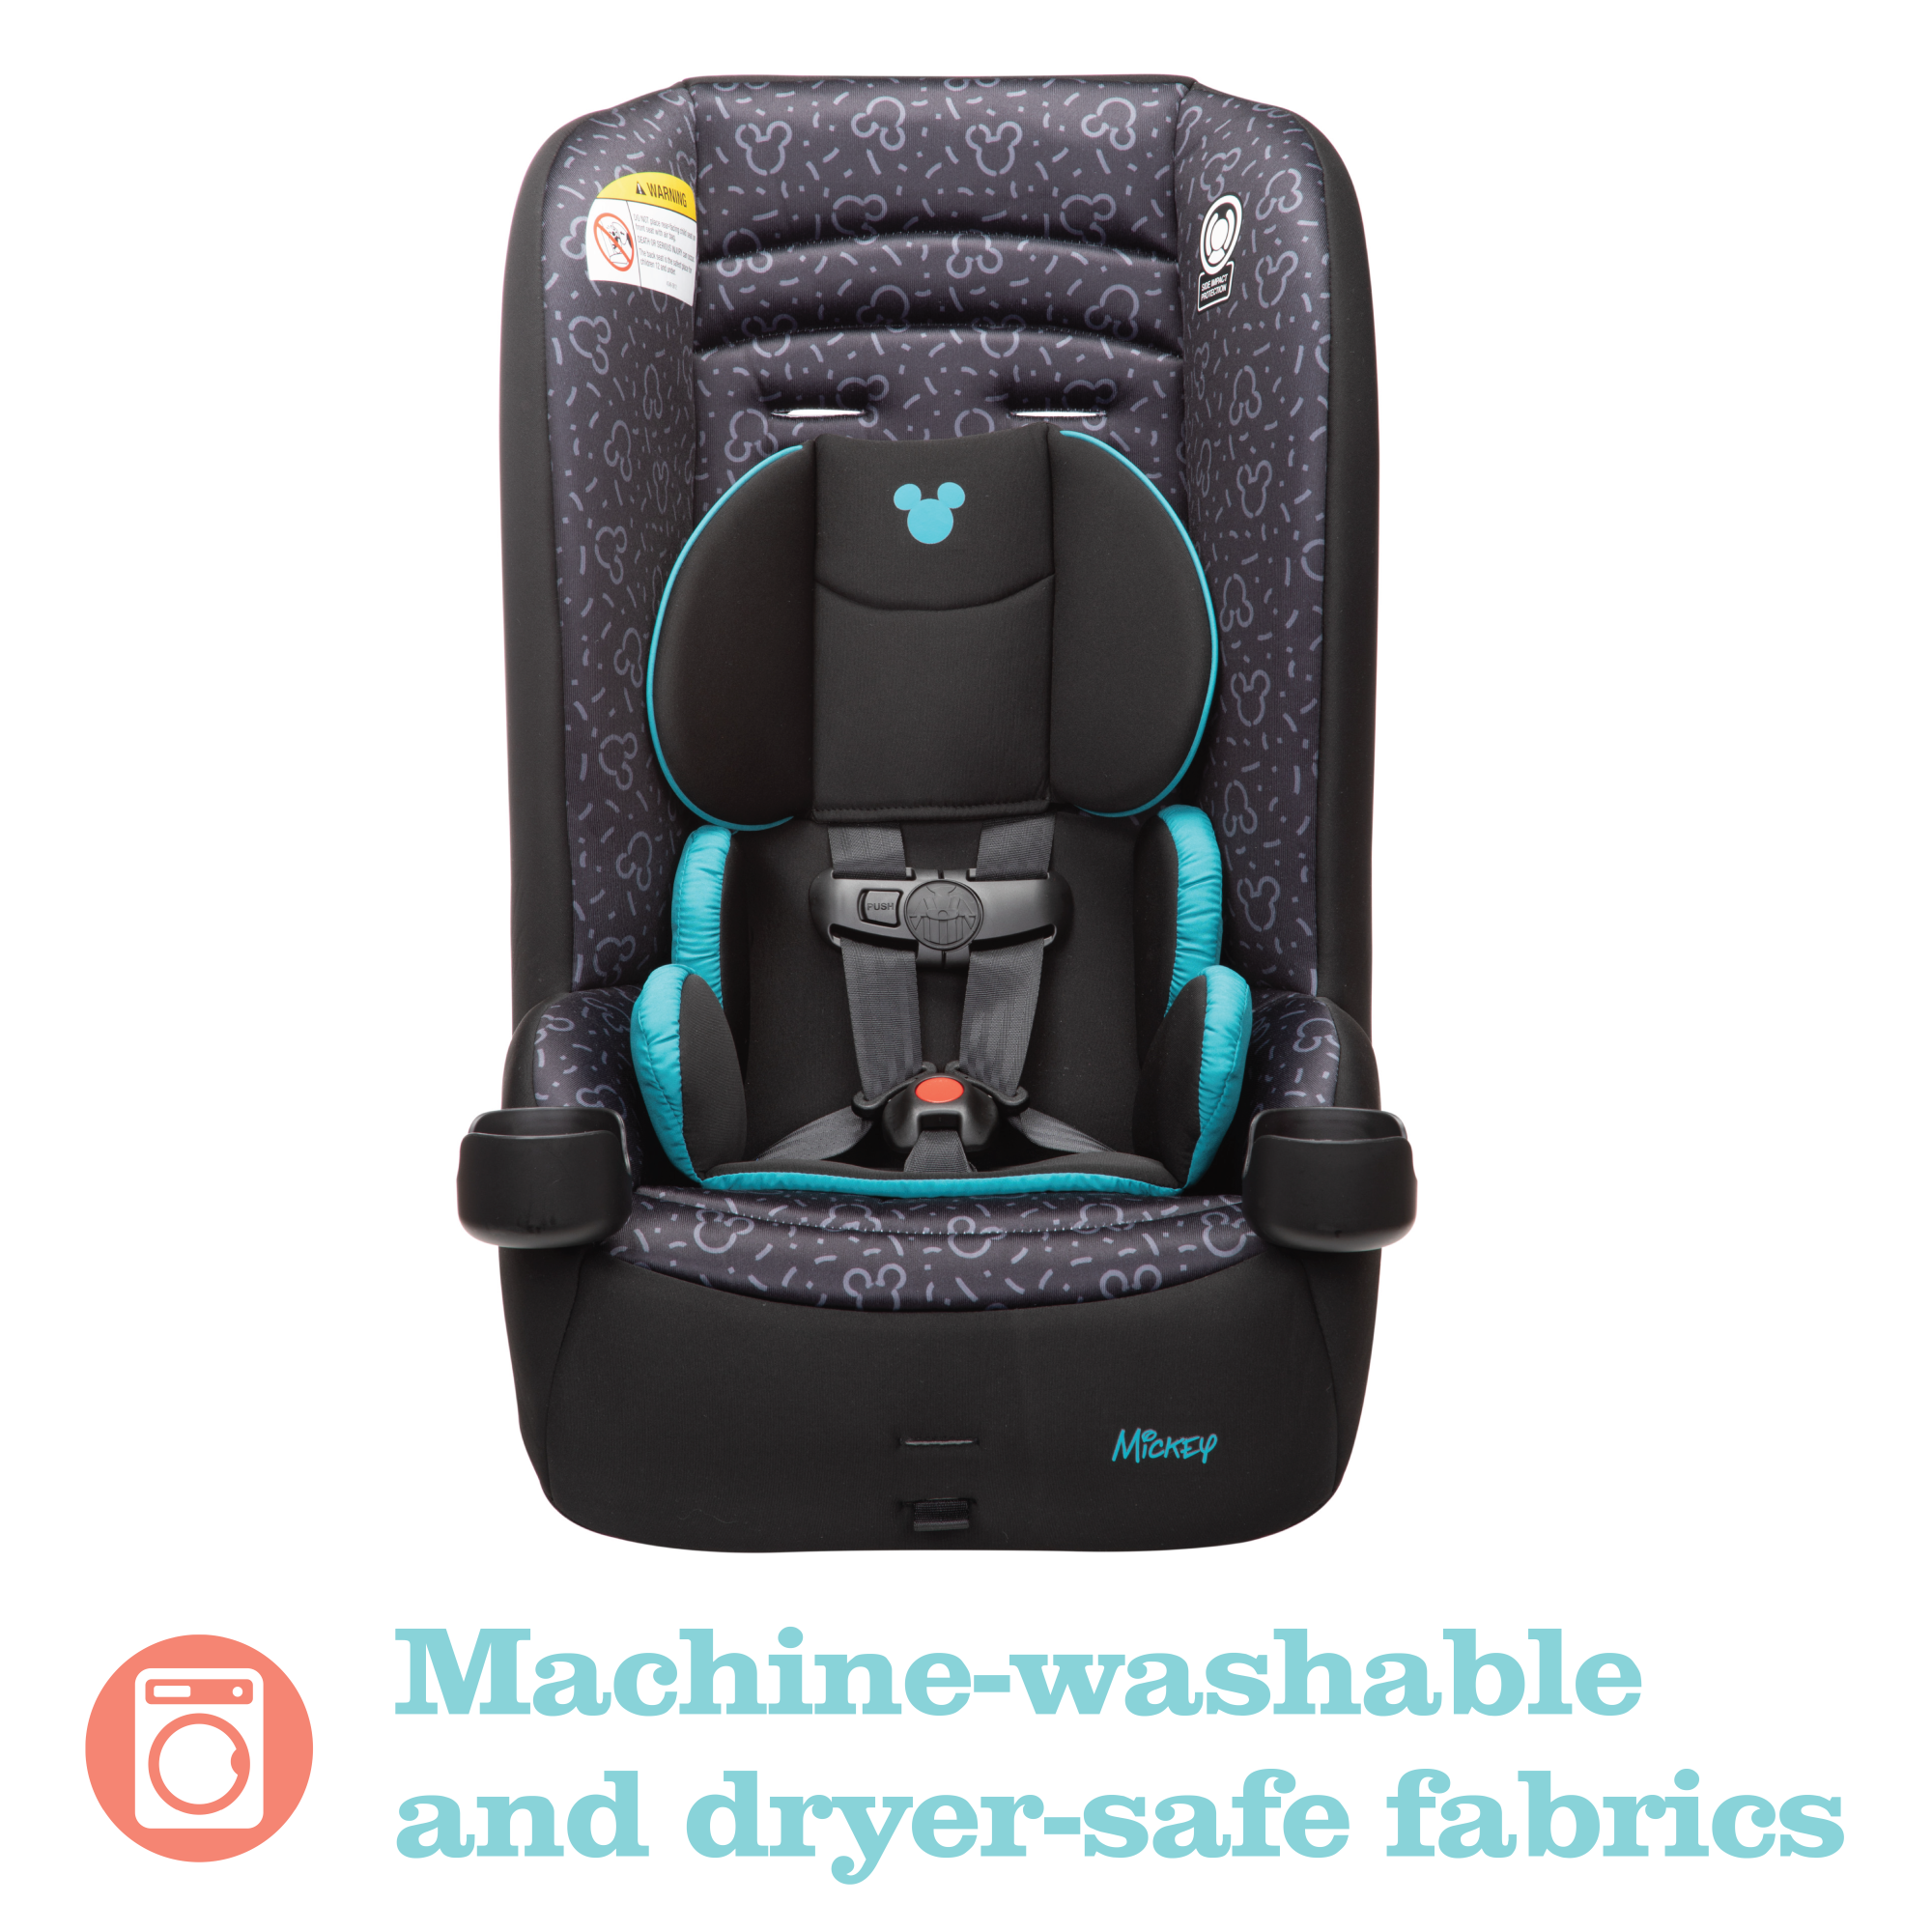 Disney Baby Jive 2-in-1 Convertible Car Seat - machine-washable and dryer-safe fabrics